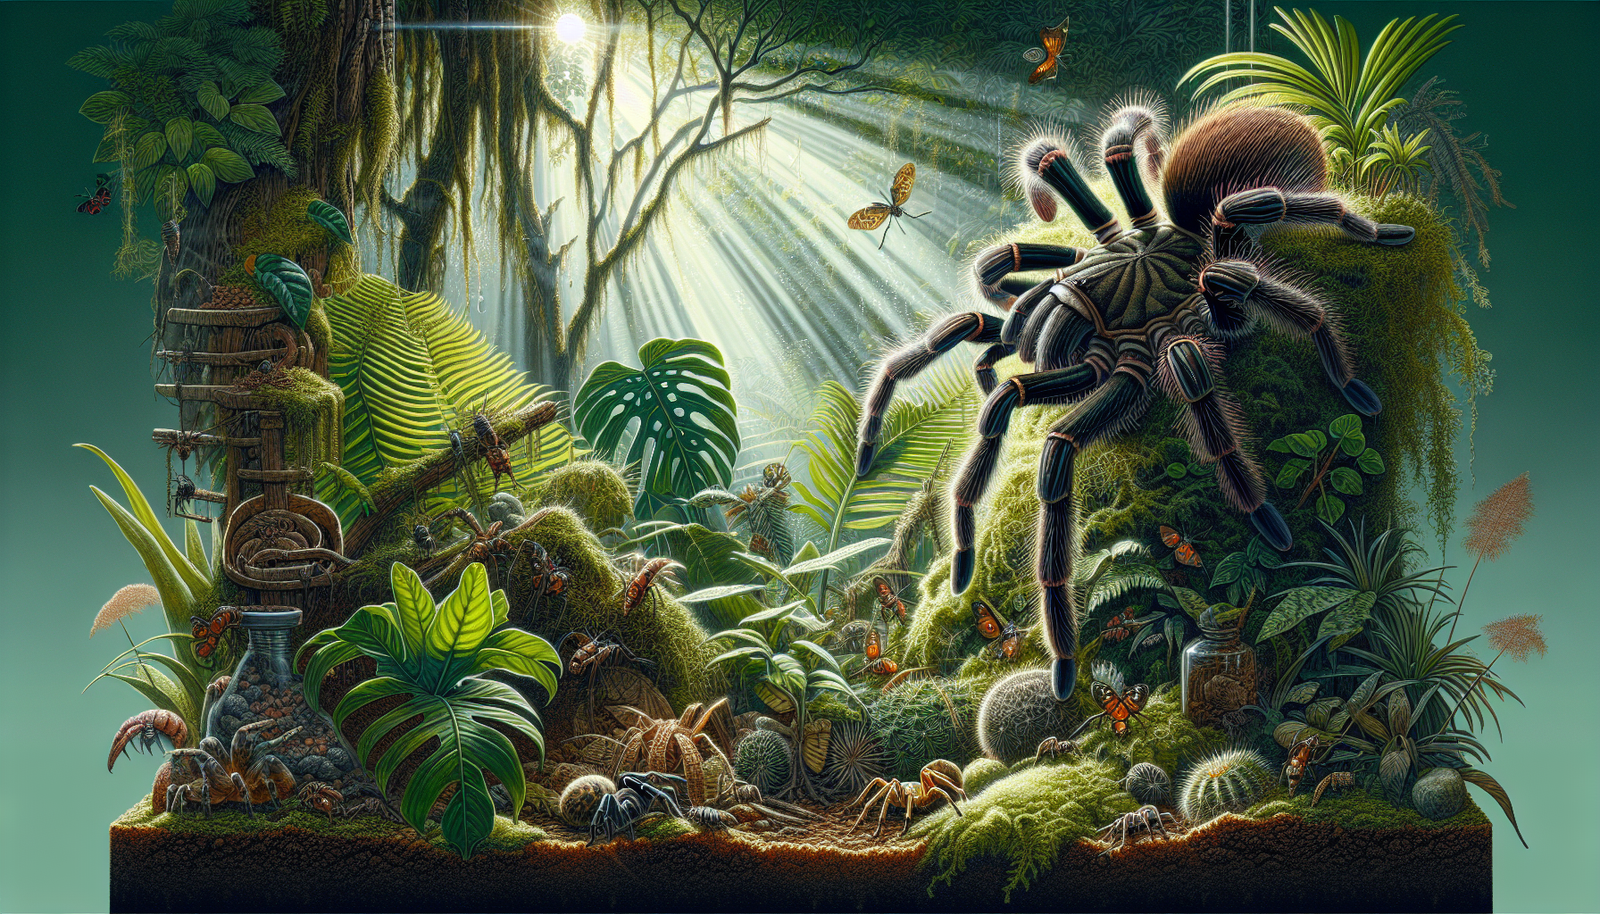 Can Tarantulas Be Kept In Bioactive Setups With Other Organisms?